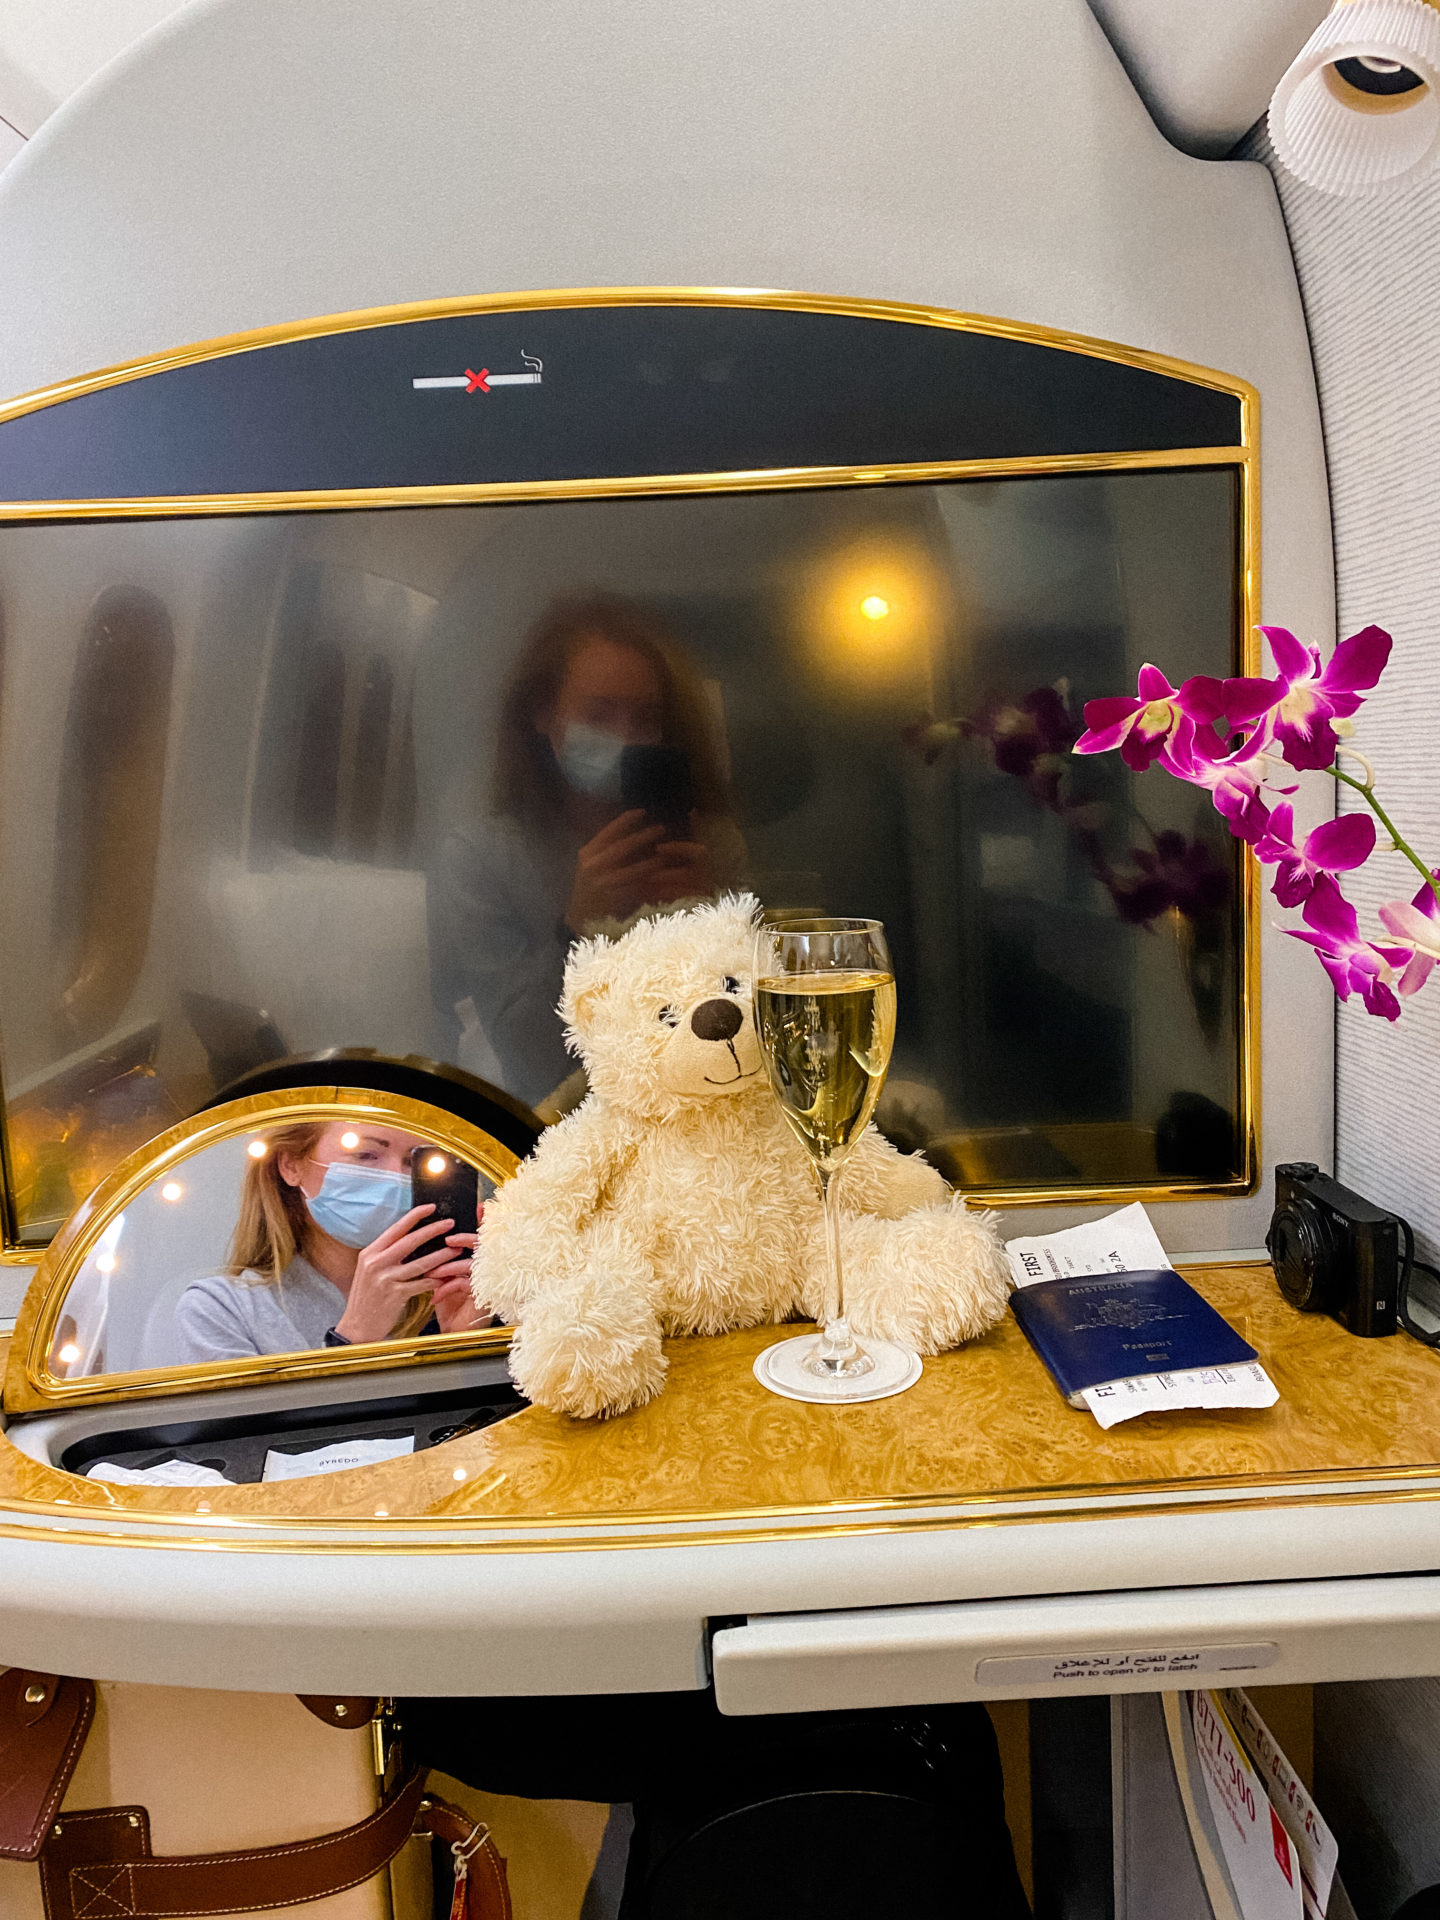 Emirates first class review